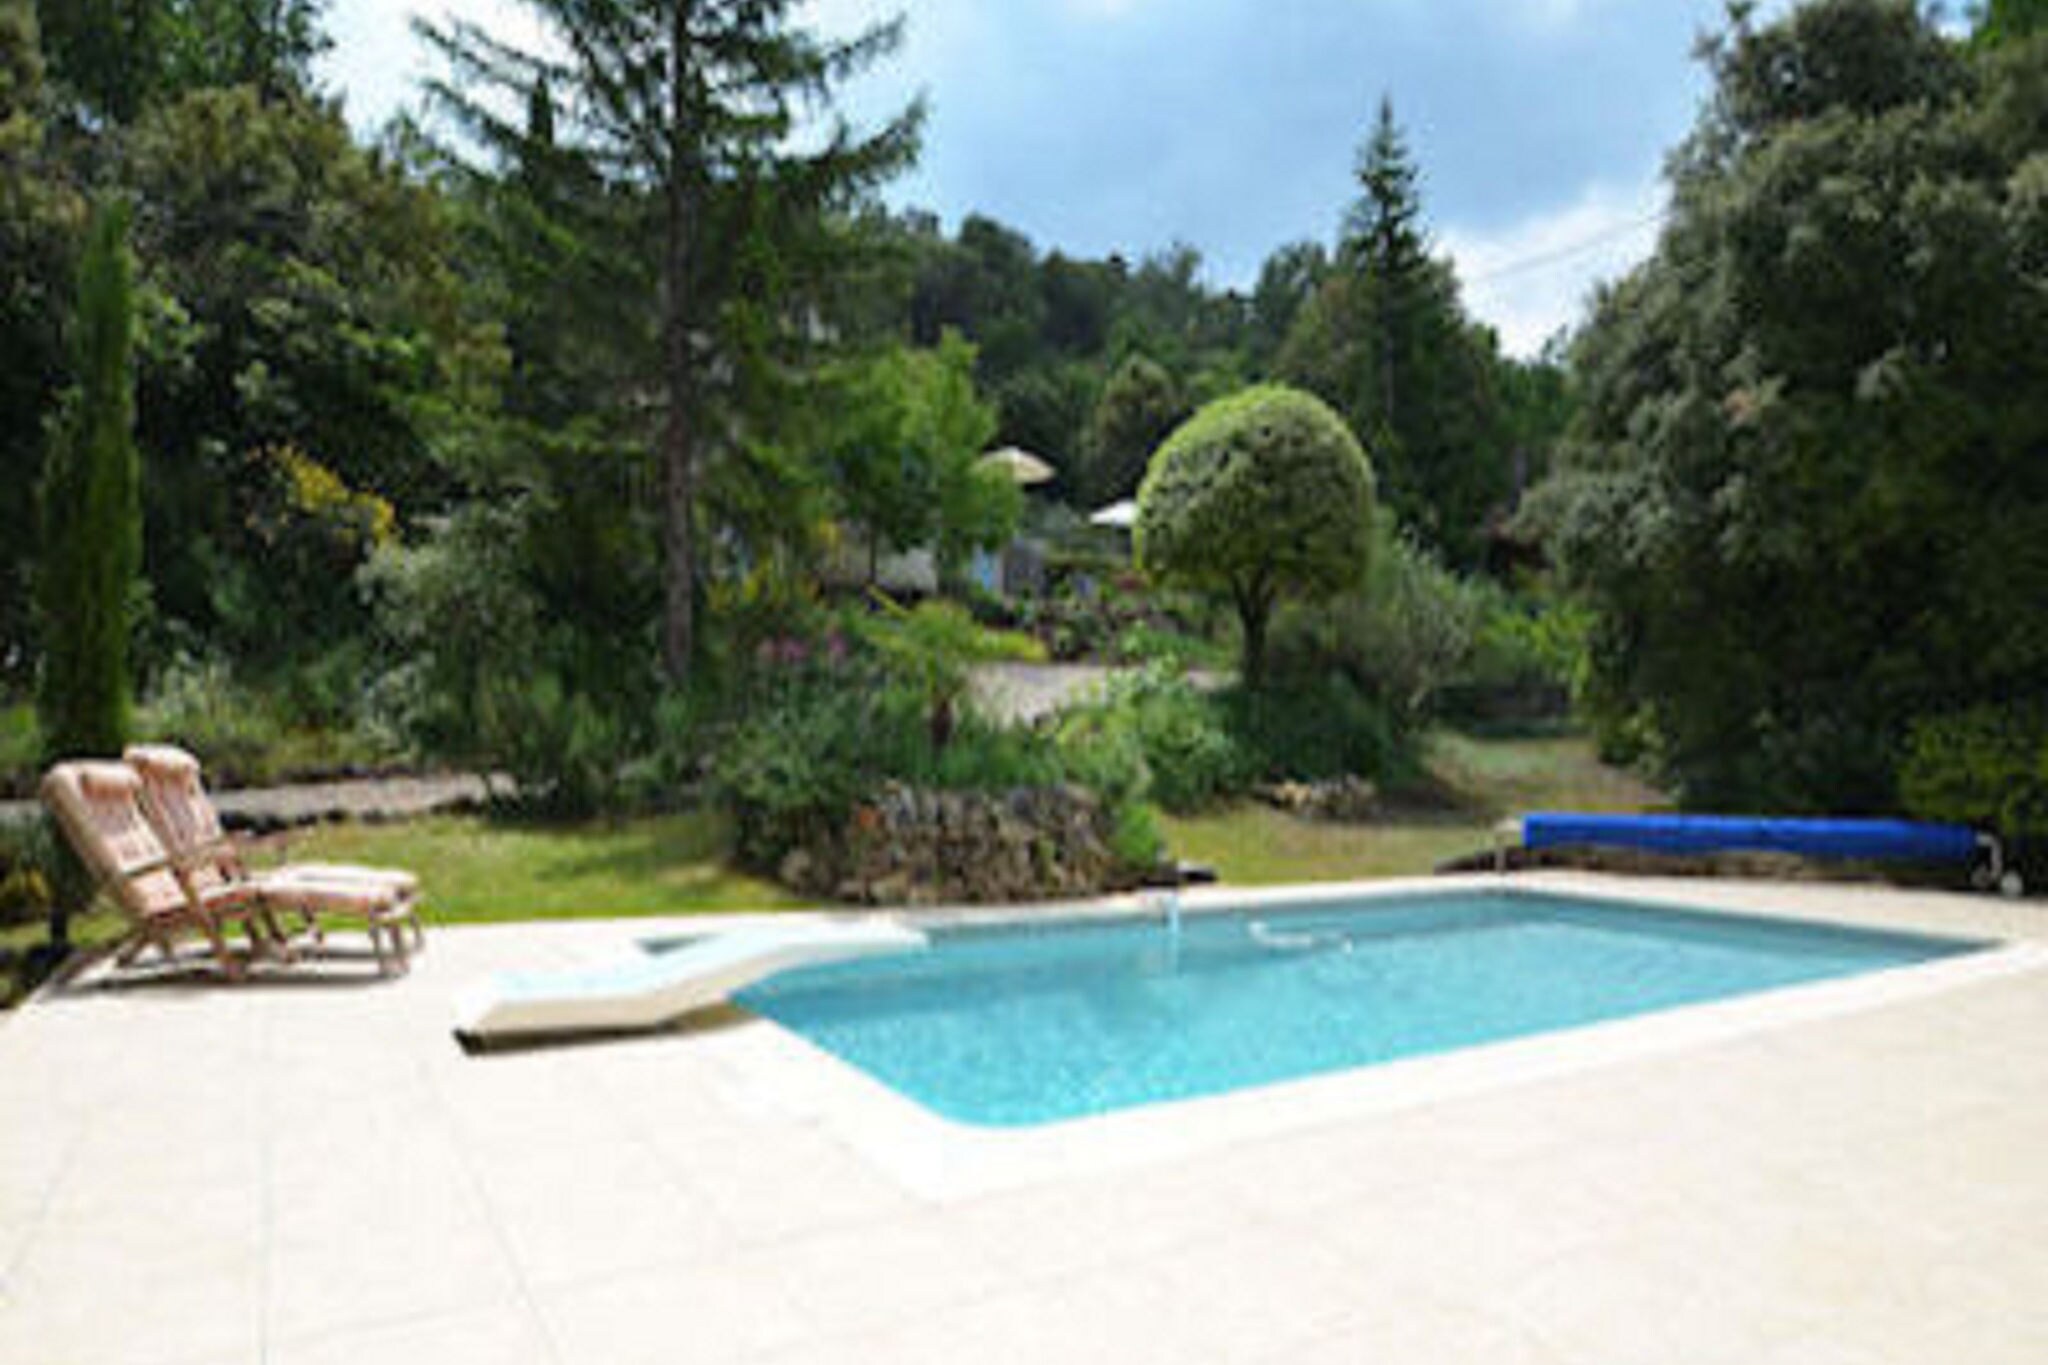 Attractive holiday home with private pool, stunning views, surrounded by nature!